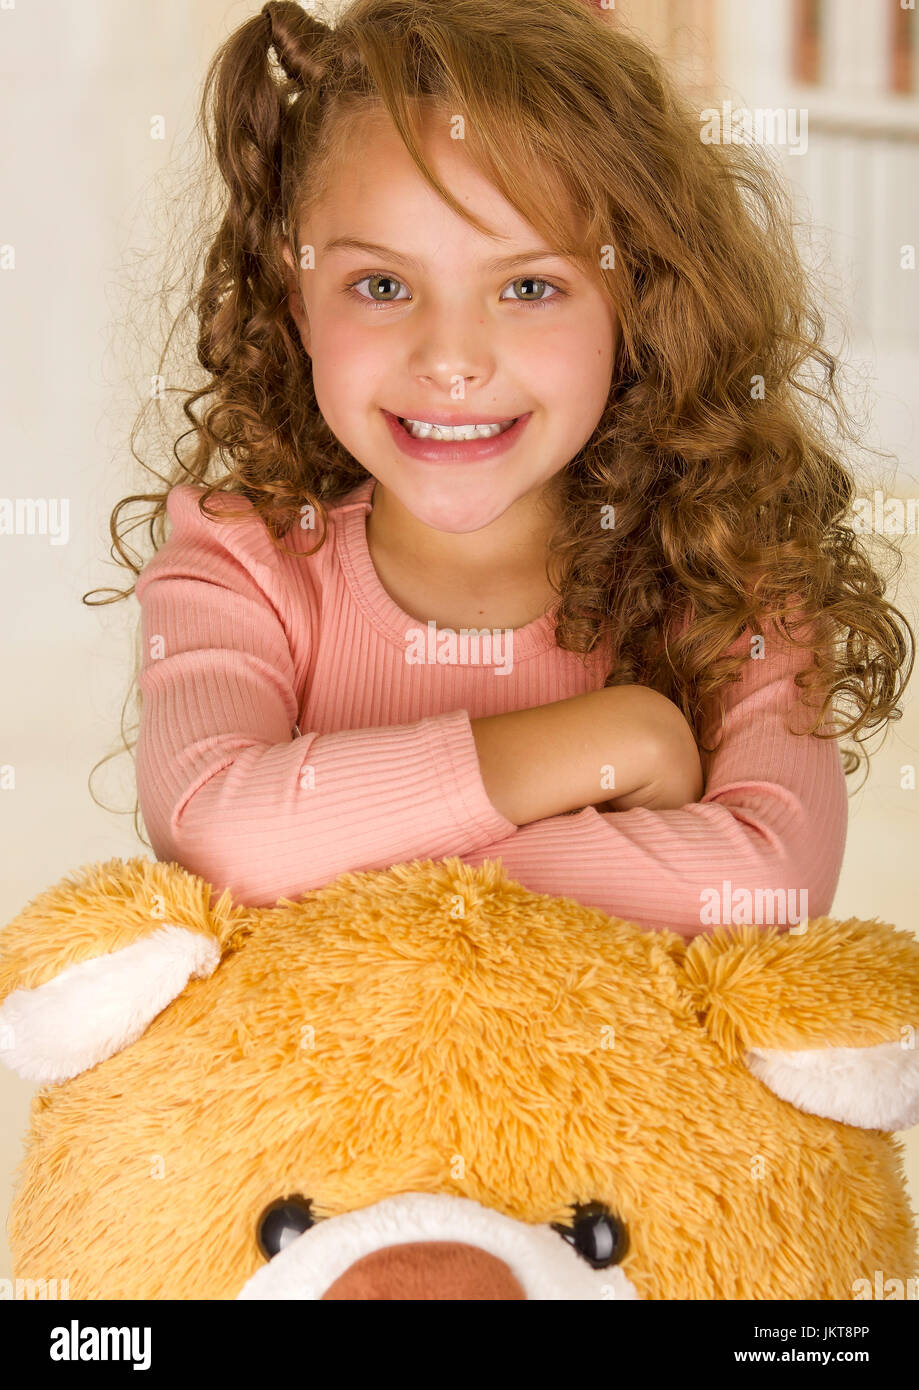 A portrait of a young pretty girl smiling and posing over her teddy bear head in a doctor office background Stock Photo